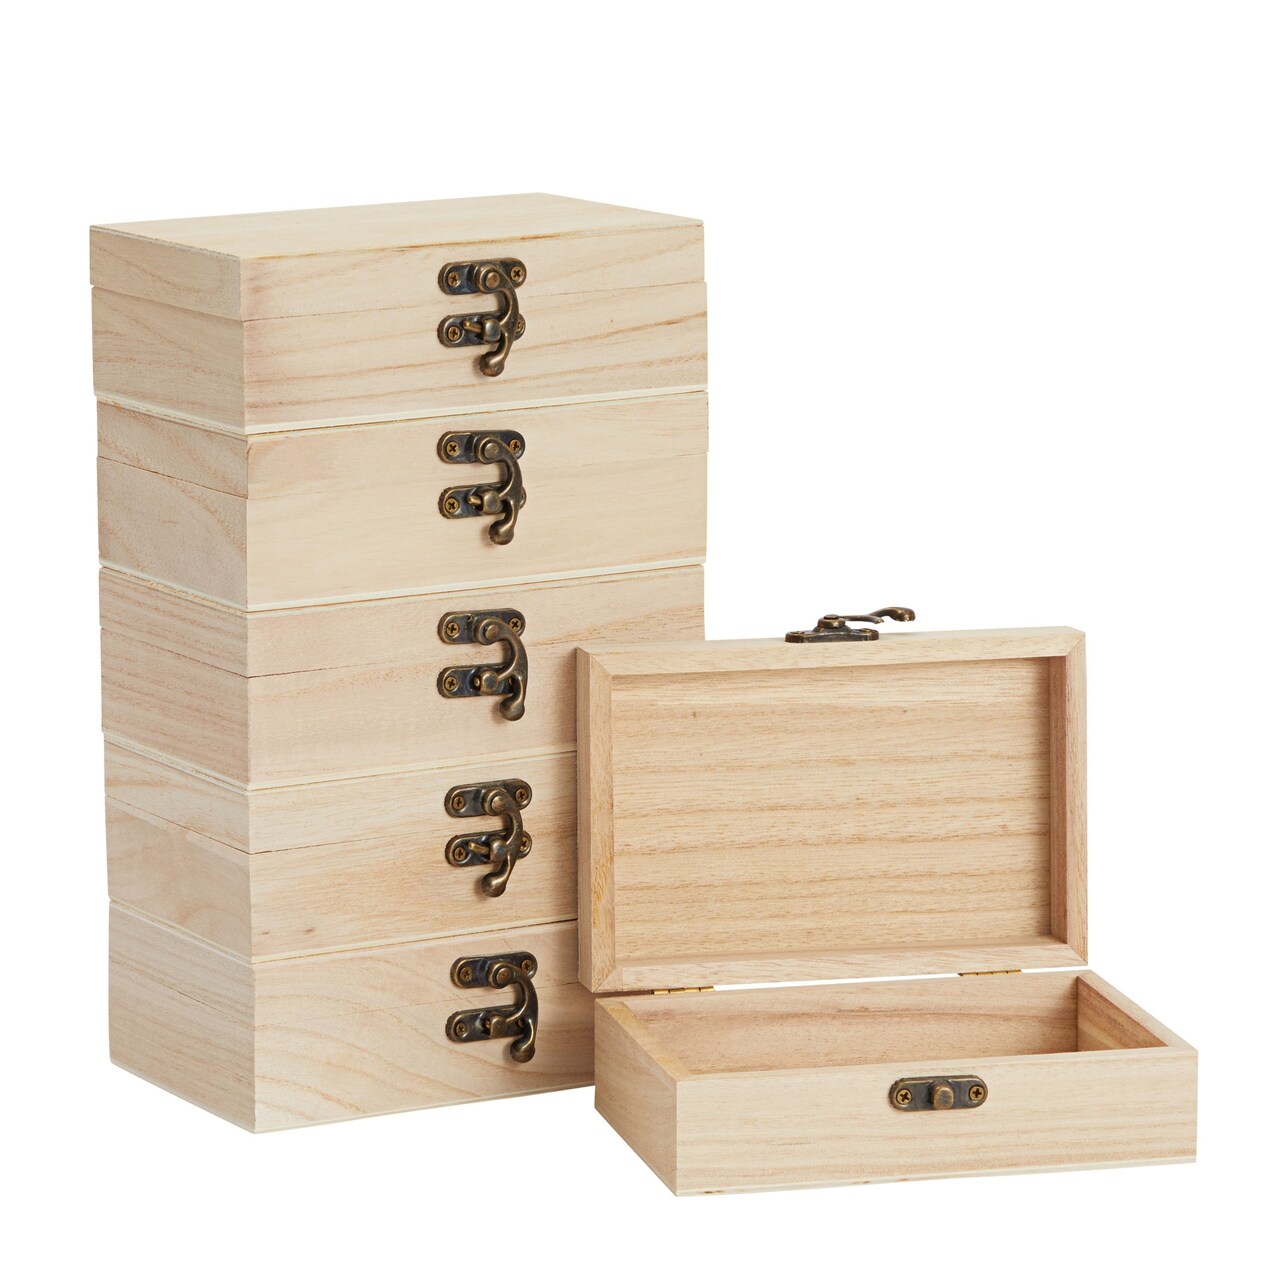 6 Pack Wood Box Small Unfinished with Hinged Lids for Jewelry, Wooden Box for DIY Crafts (6 x 4 x 2 In)